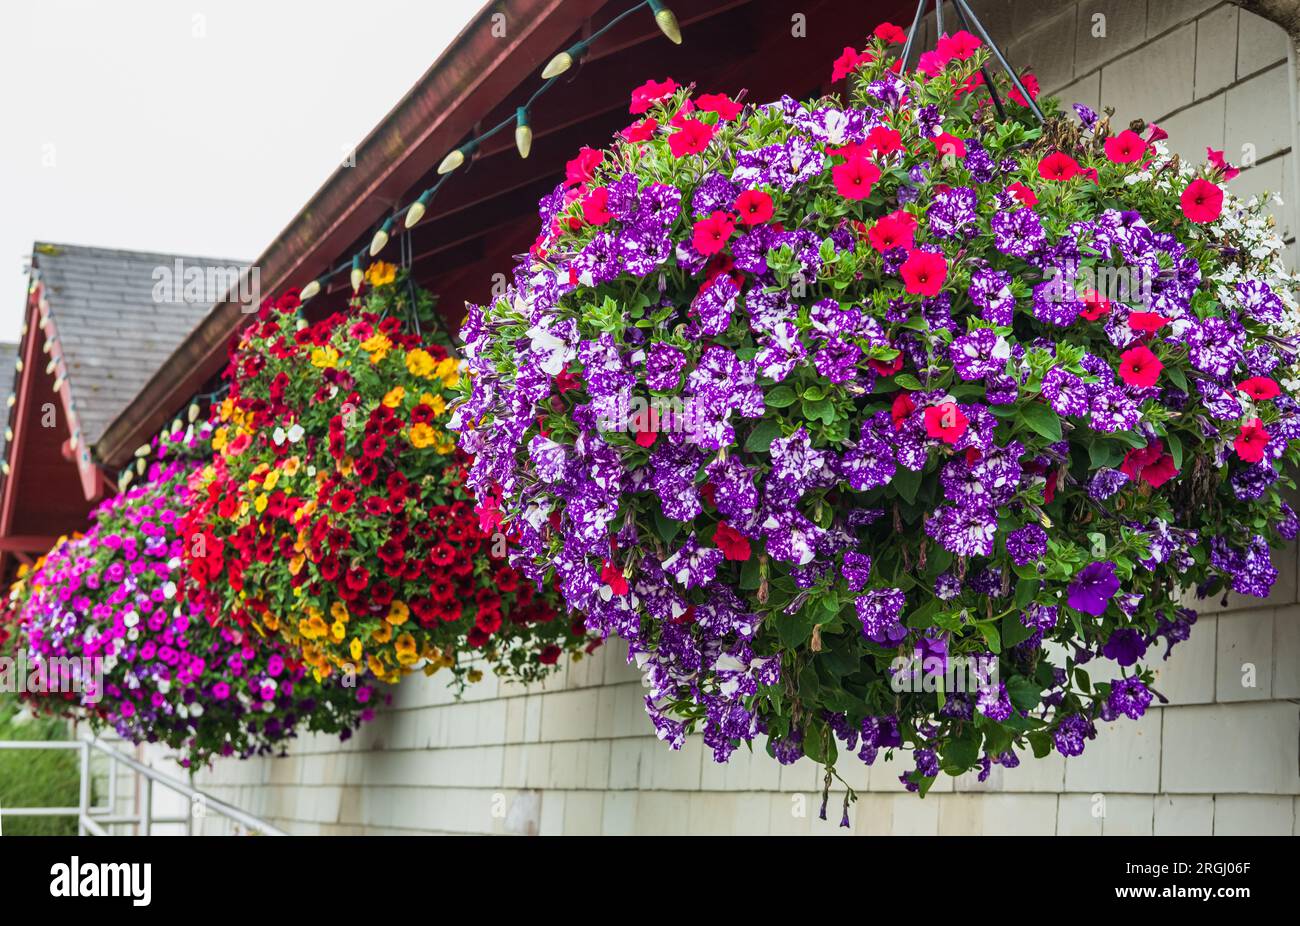 Flowers in hanging basket around the house. Hanging Flower Pots hanging on a wooden wall. Purple and pink petunias in a hanging basket. Pots of bright Stock Photo